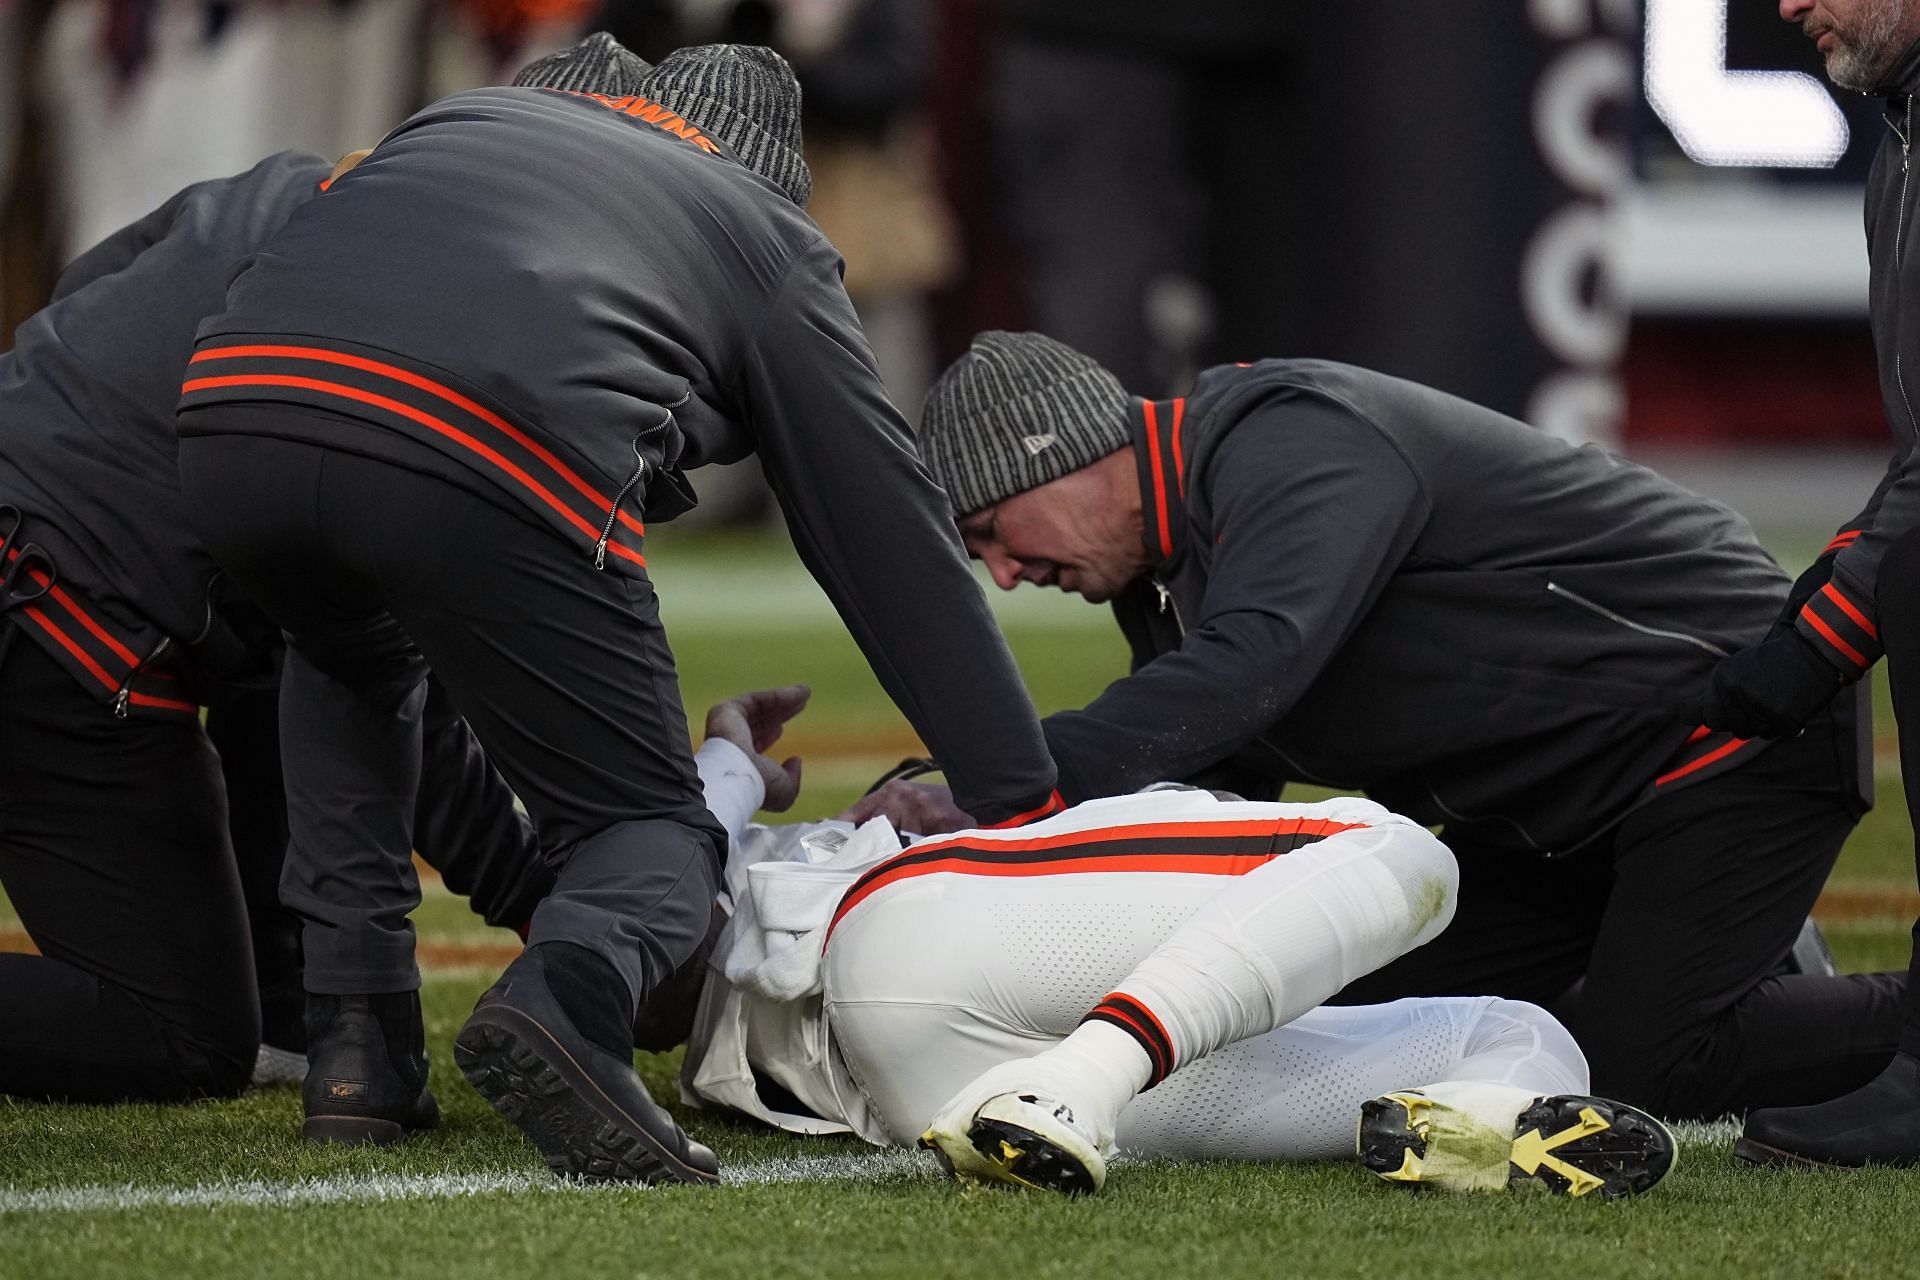 Dorian Thompson-Robinson receives medical attention after a huge hit.